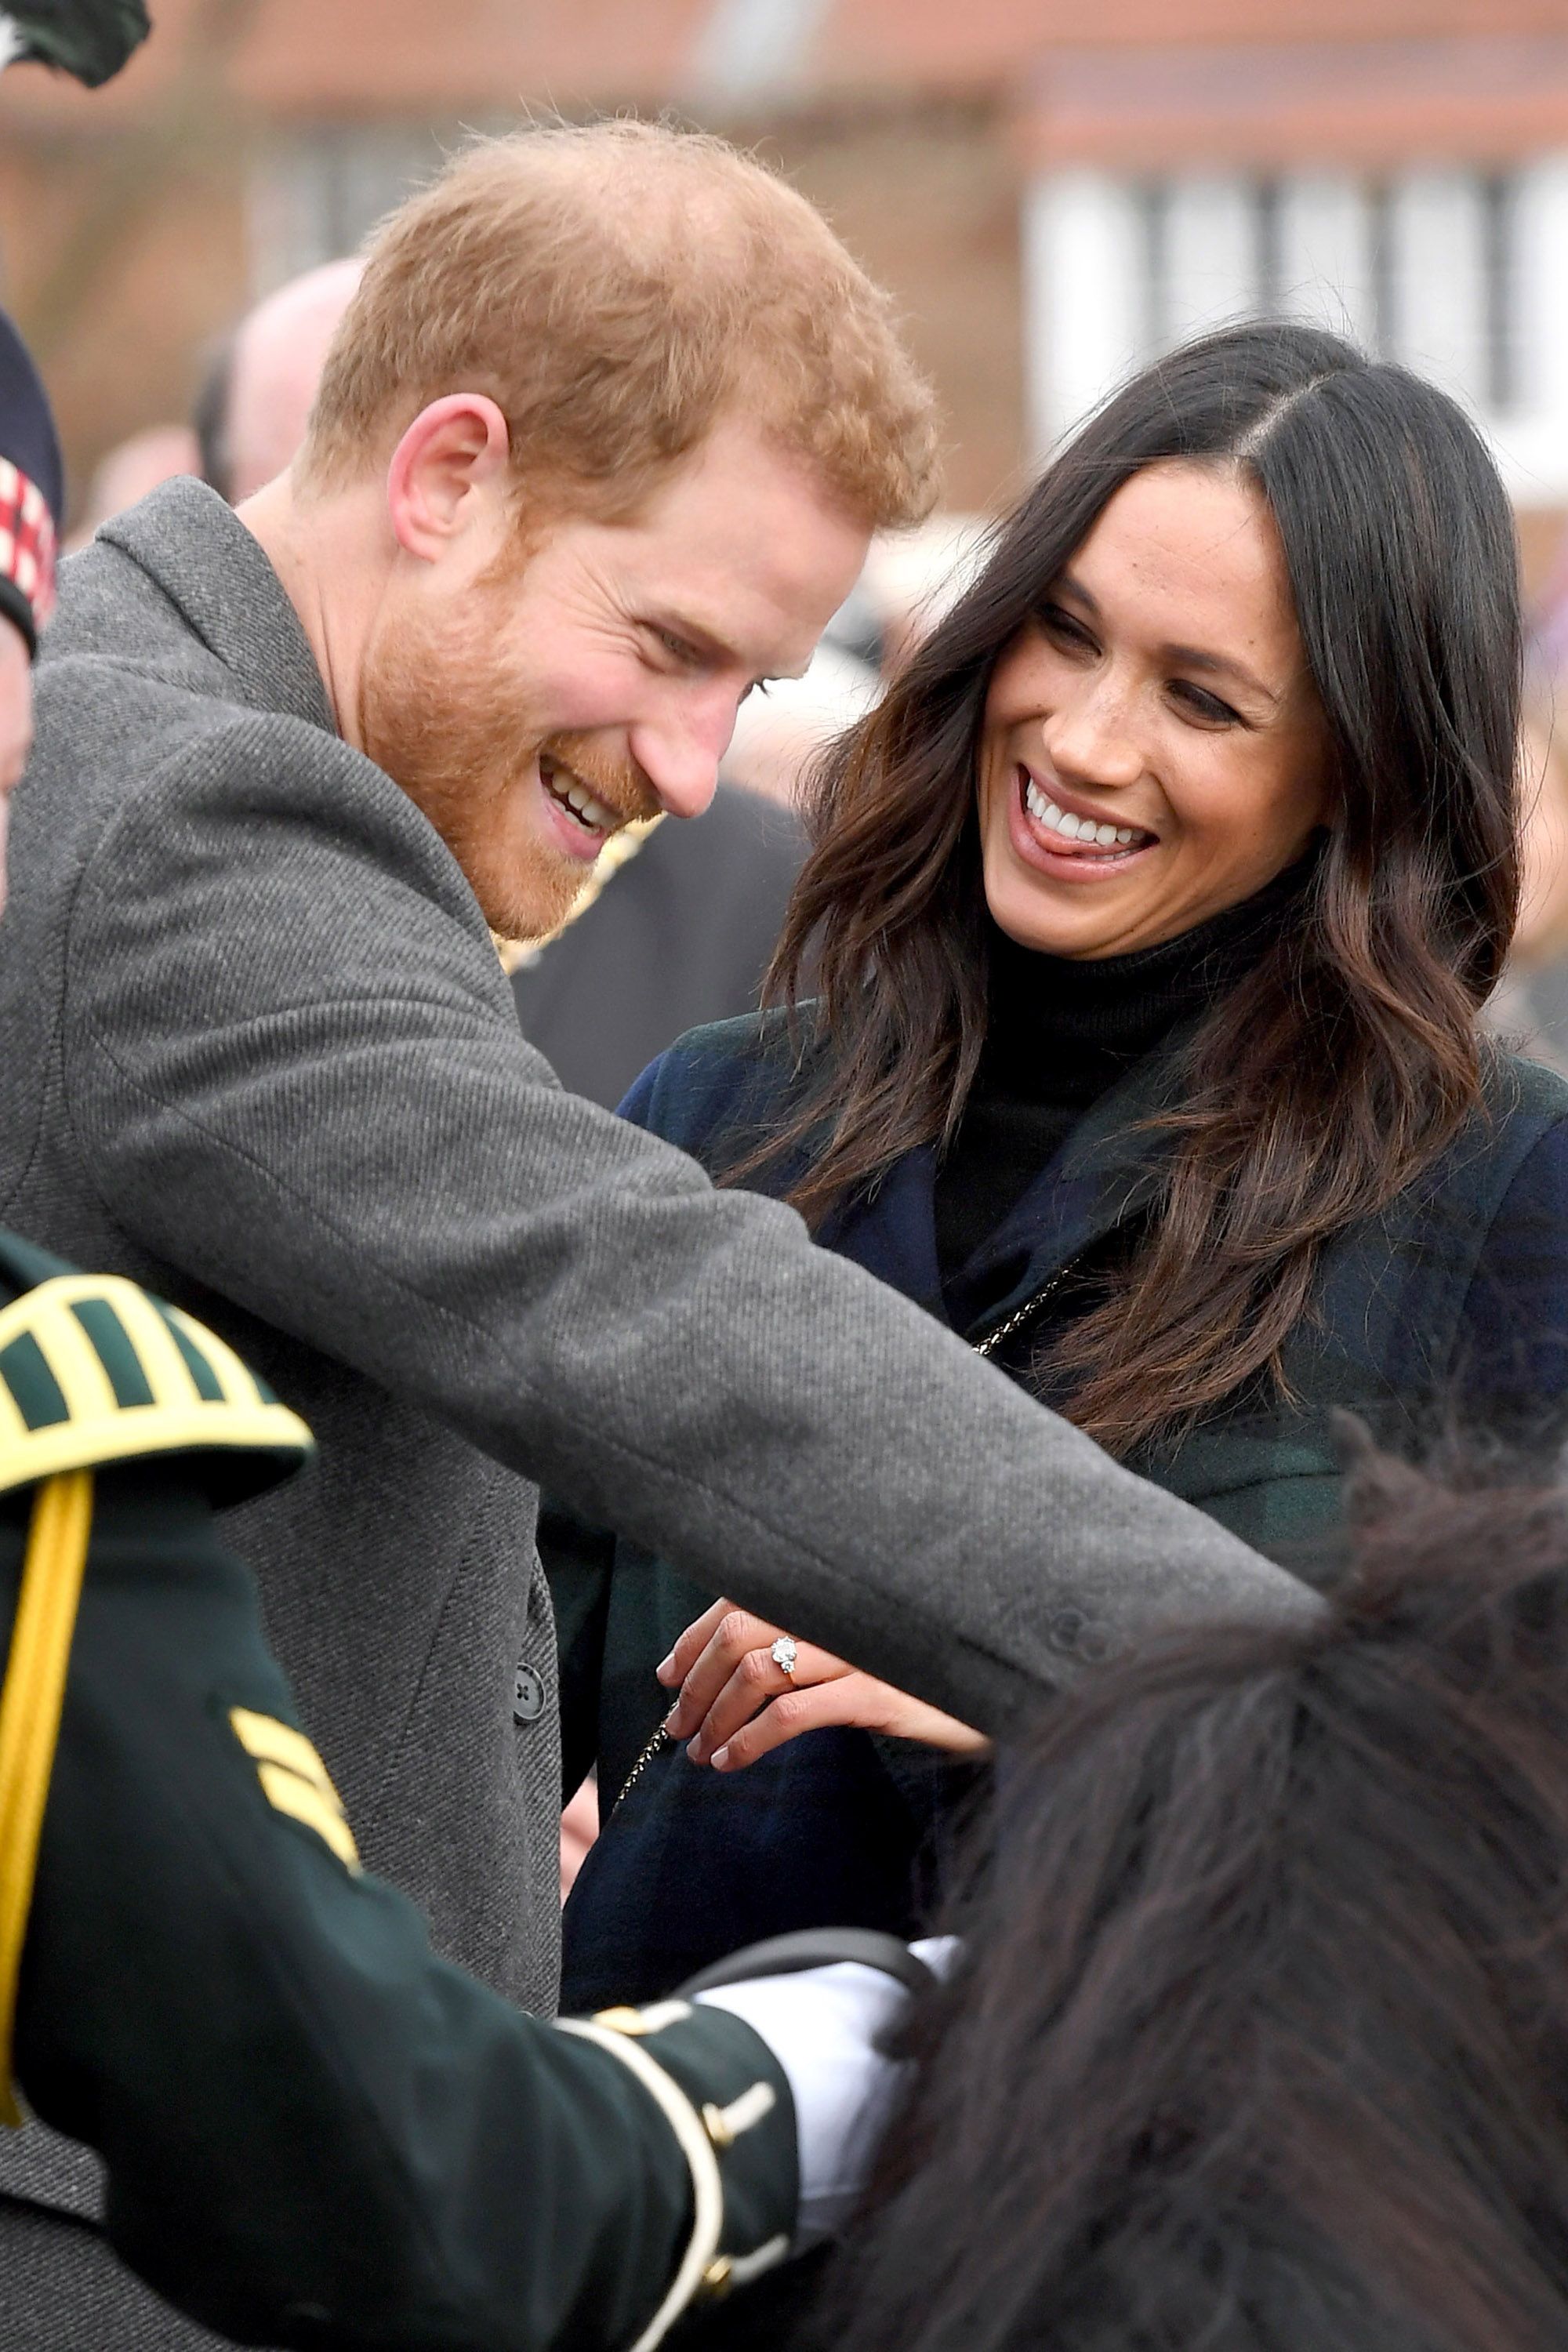 https://hips.hearstapps.com/hmg-prod.s3.amazonaws.com/images/hbz-prince-harry-meghan-markle-cute-moments-gettyimages-917838572-1523378907.jpg?crop=1xw:1xh;center,top